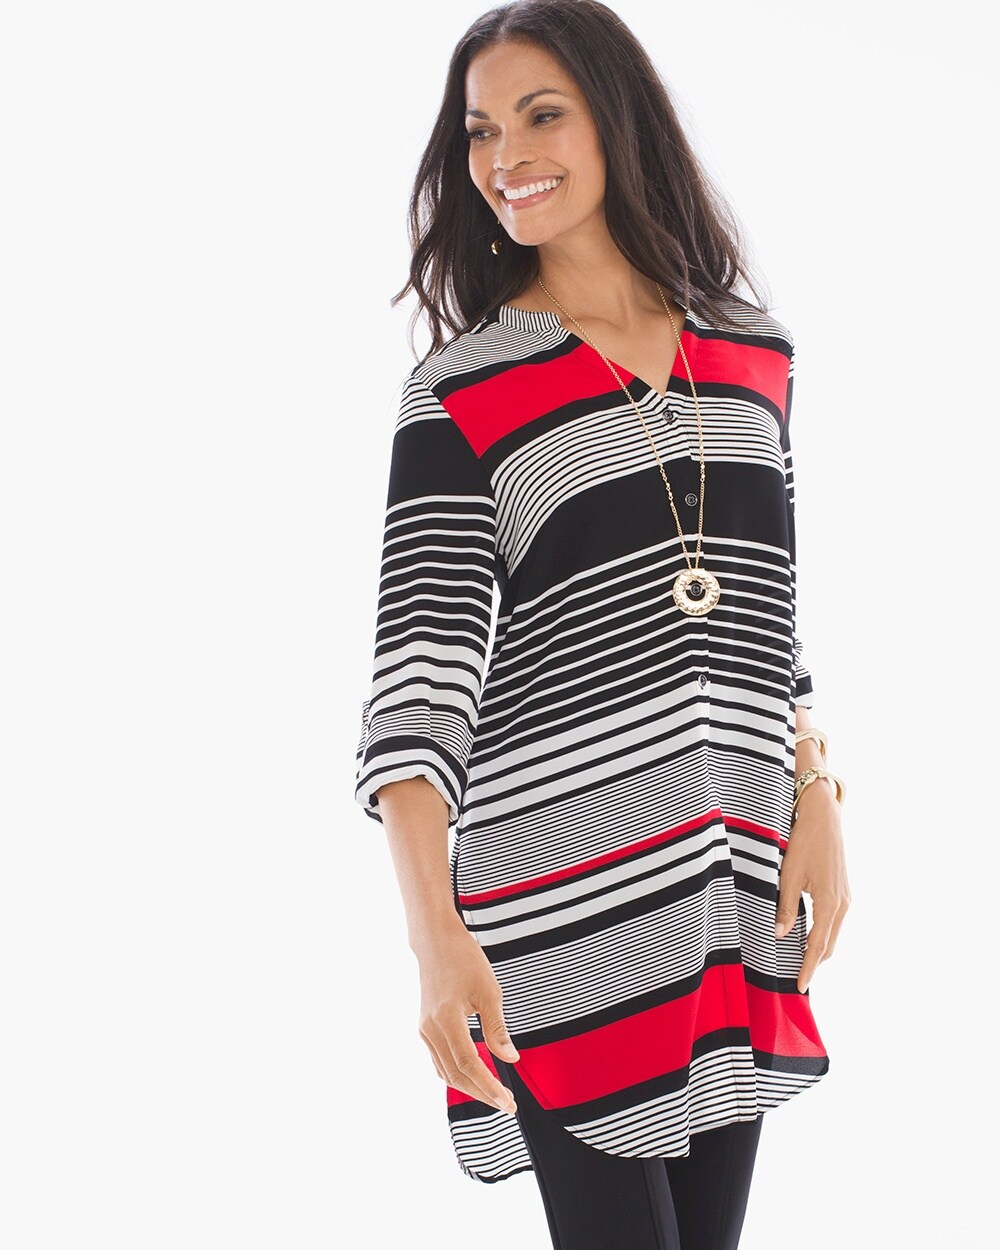 Stripe Transitions Tie-Front Top